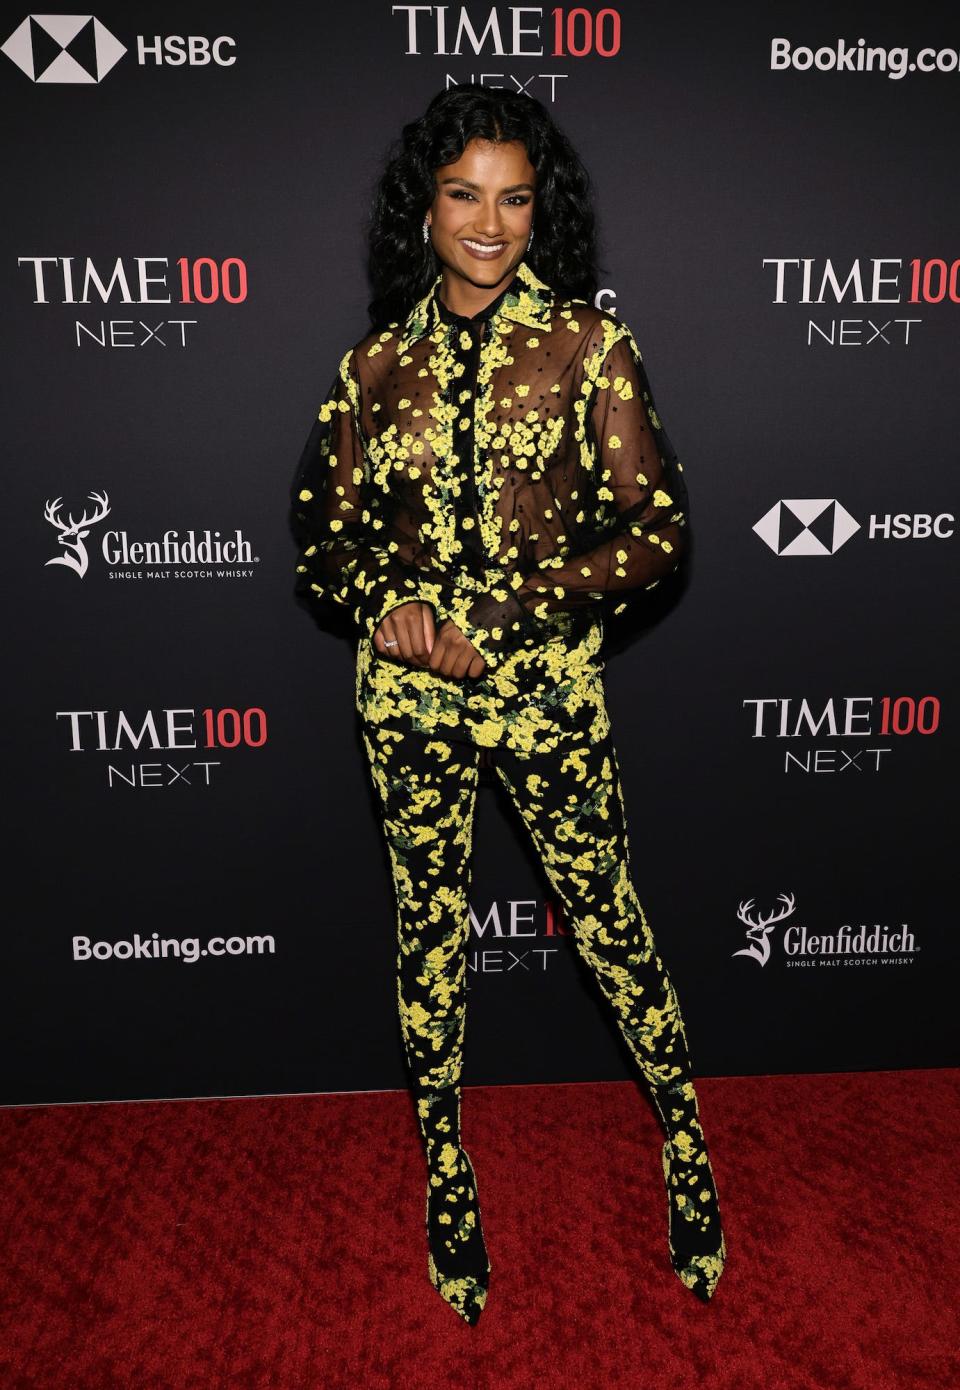 Simone Ashley at the Time100 Next event in New York City on October 25, 2022.